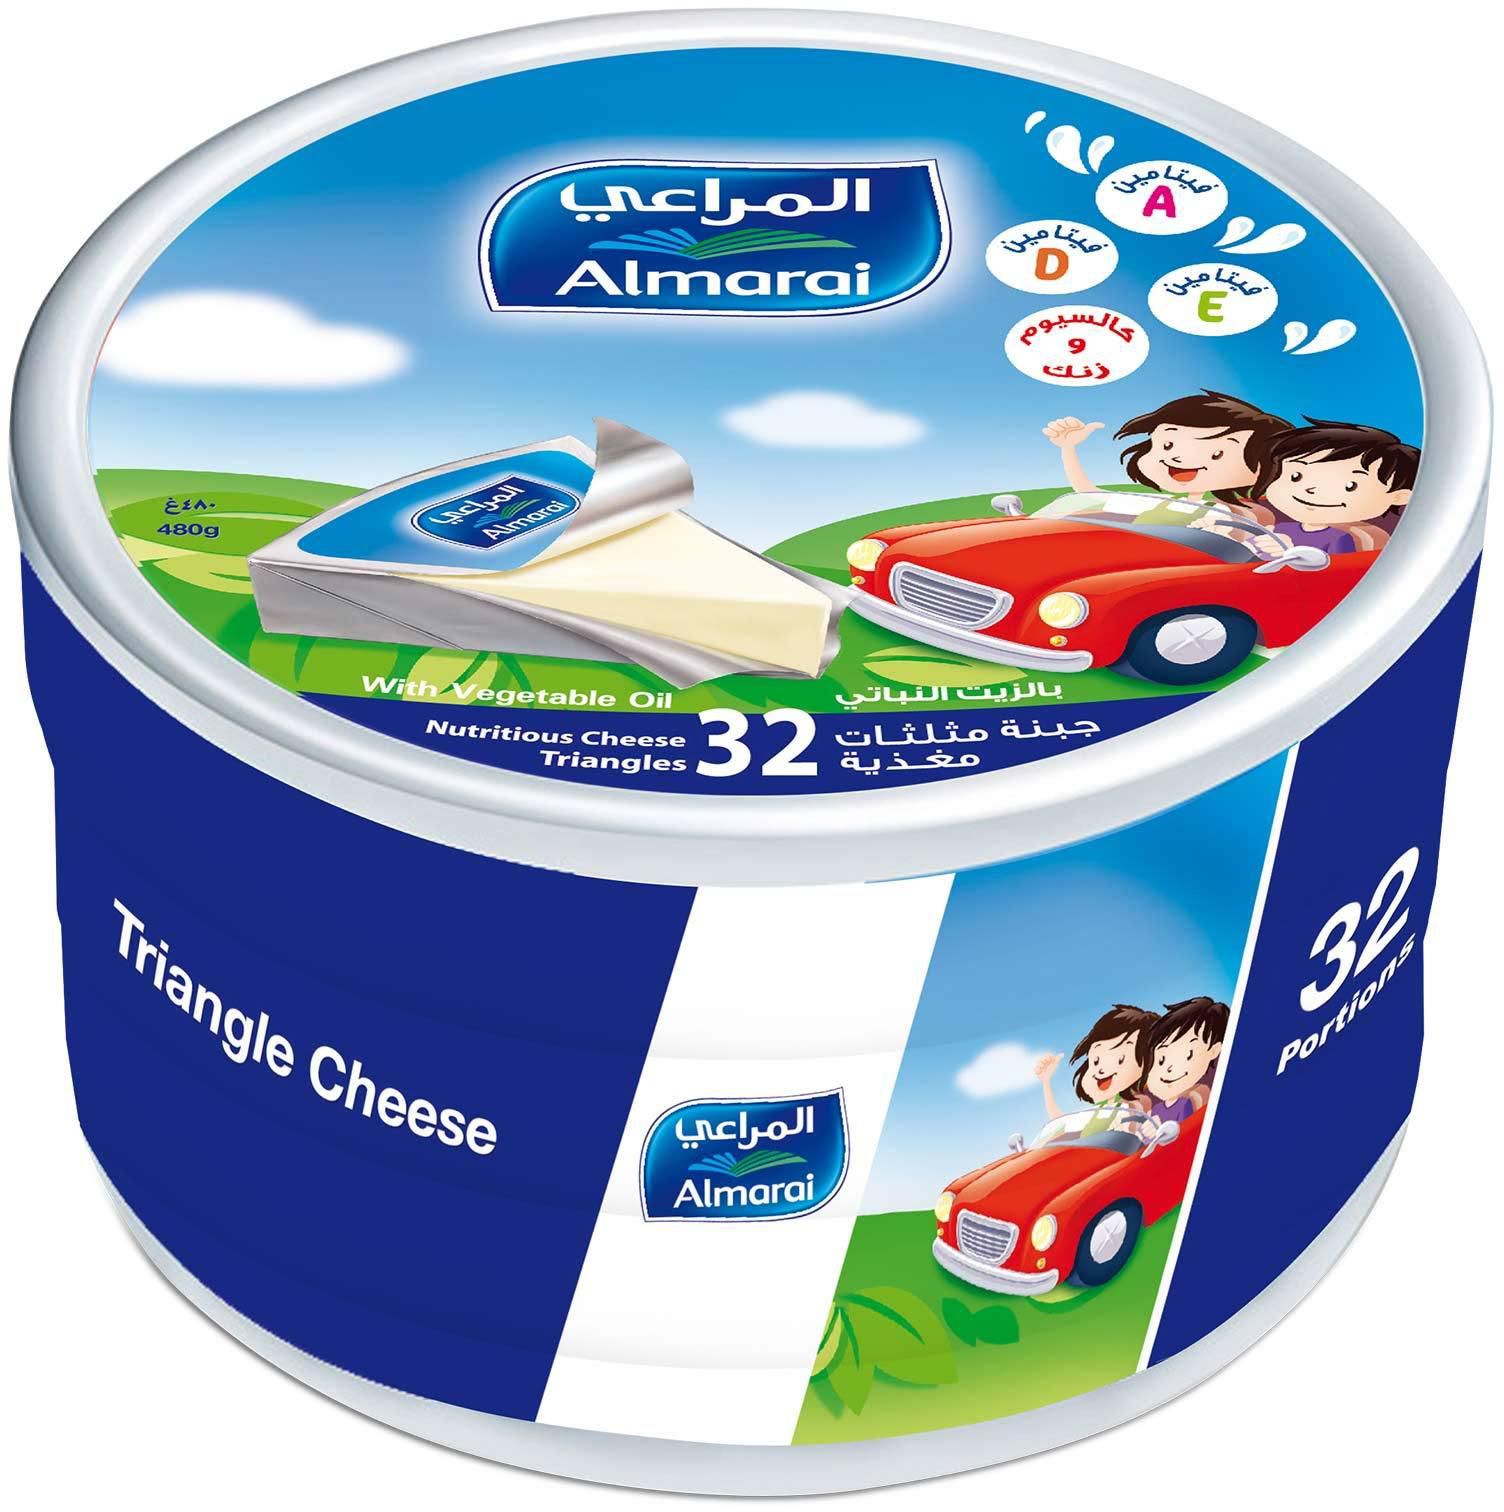 Almarai nutritious cheese triangles with vegetable oil 480 g x 32 portions